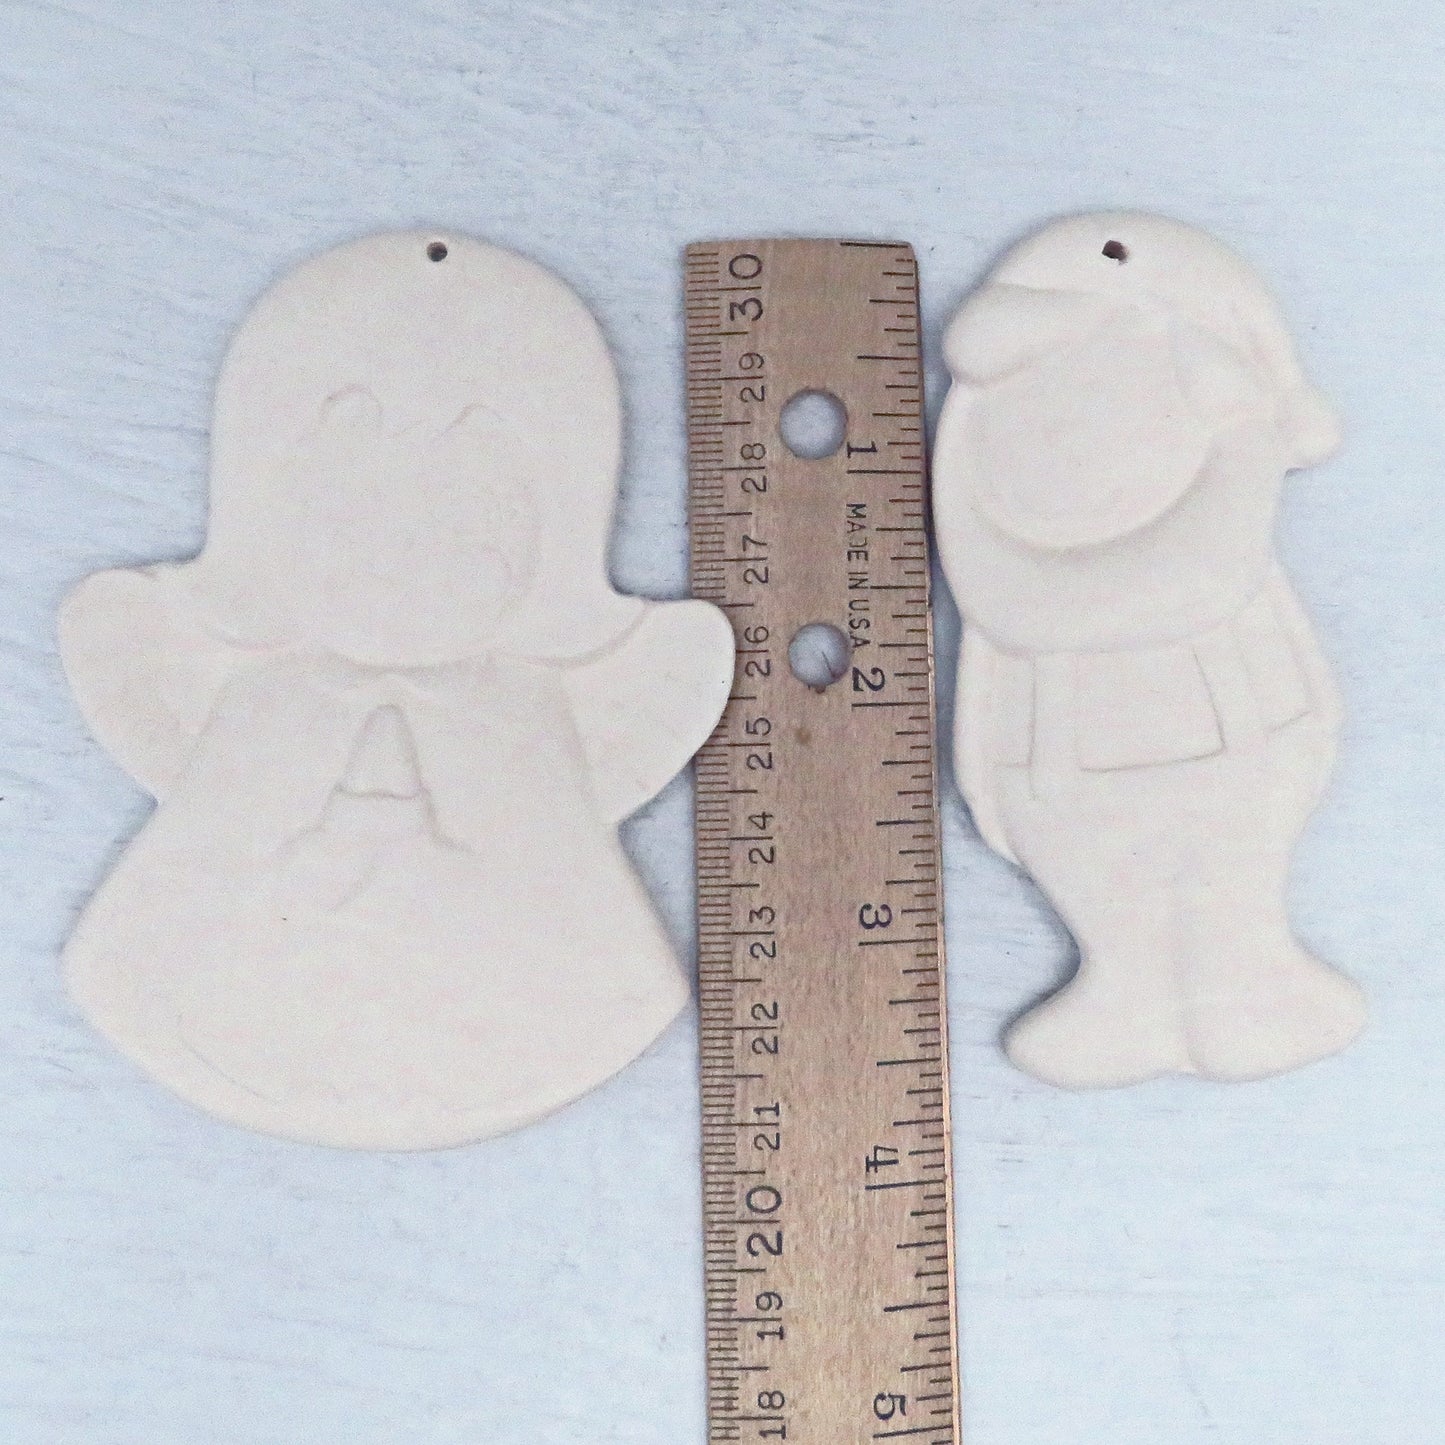 Handmade Unpainted Ceramic Christmas Tree Ornaments for Christmas Decor, Ready to Paint Angel and Elf Ornaments